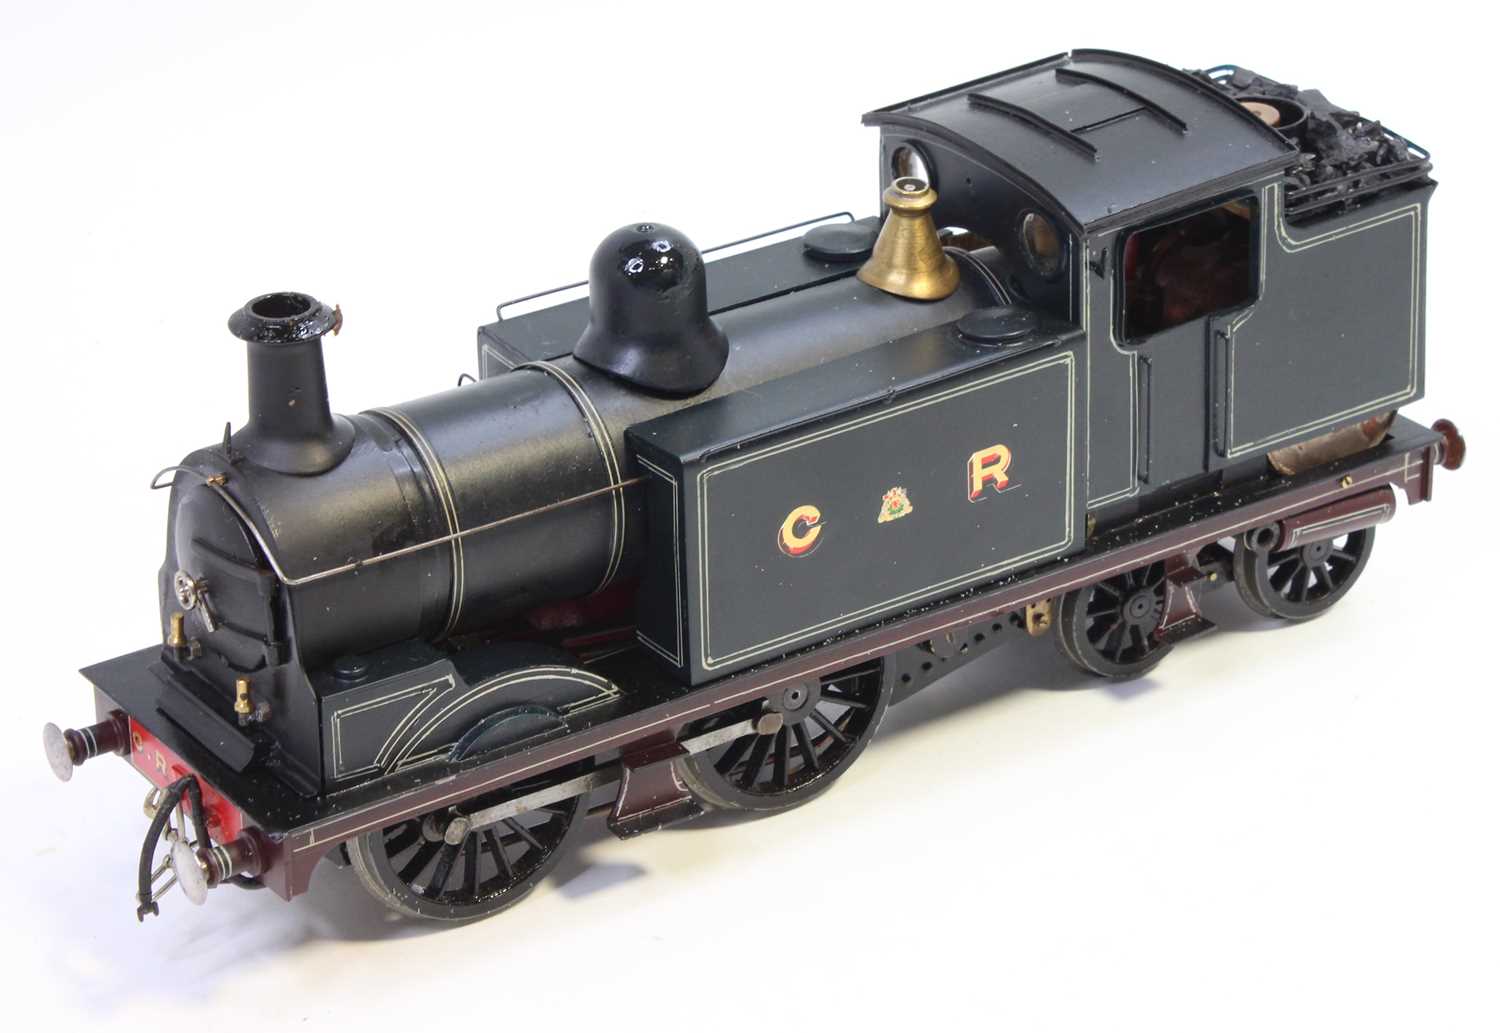 A very well executed kit built model of a Gauge 1 Caledonian Railways 0-4-4 tank loco finished in